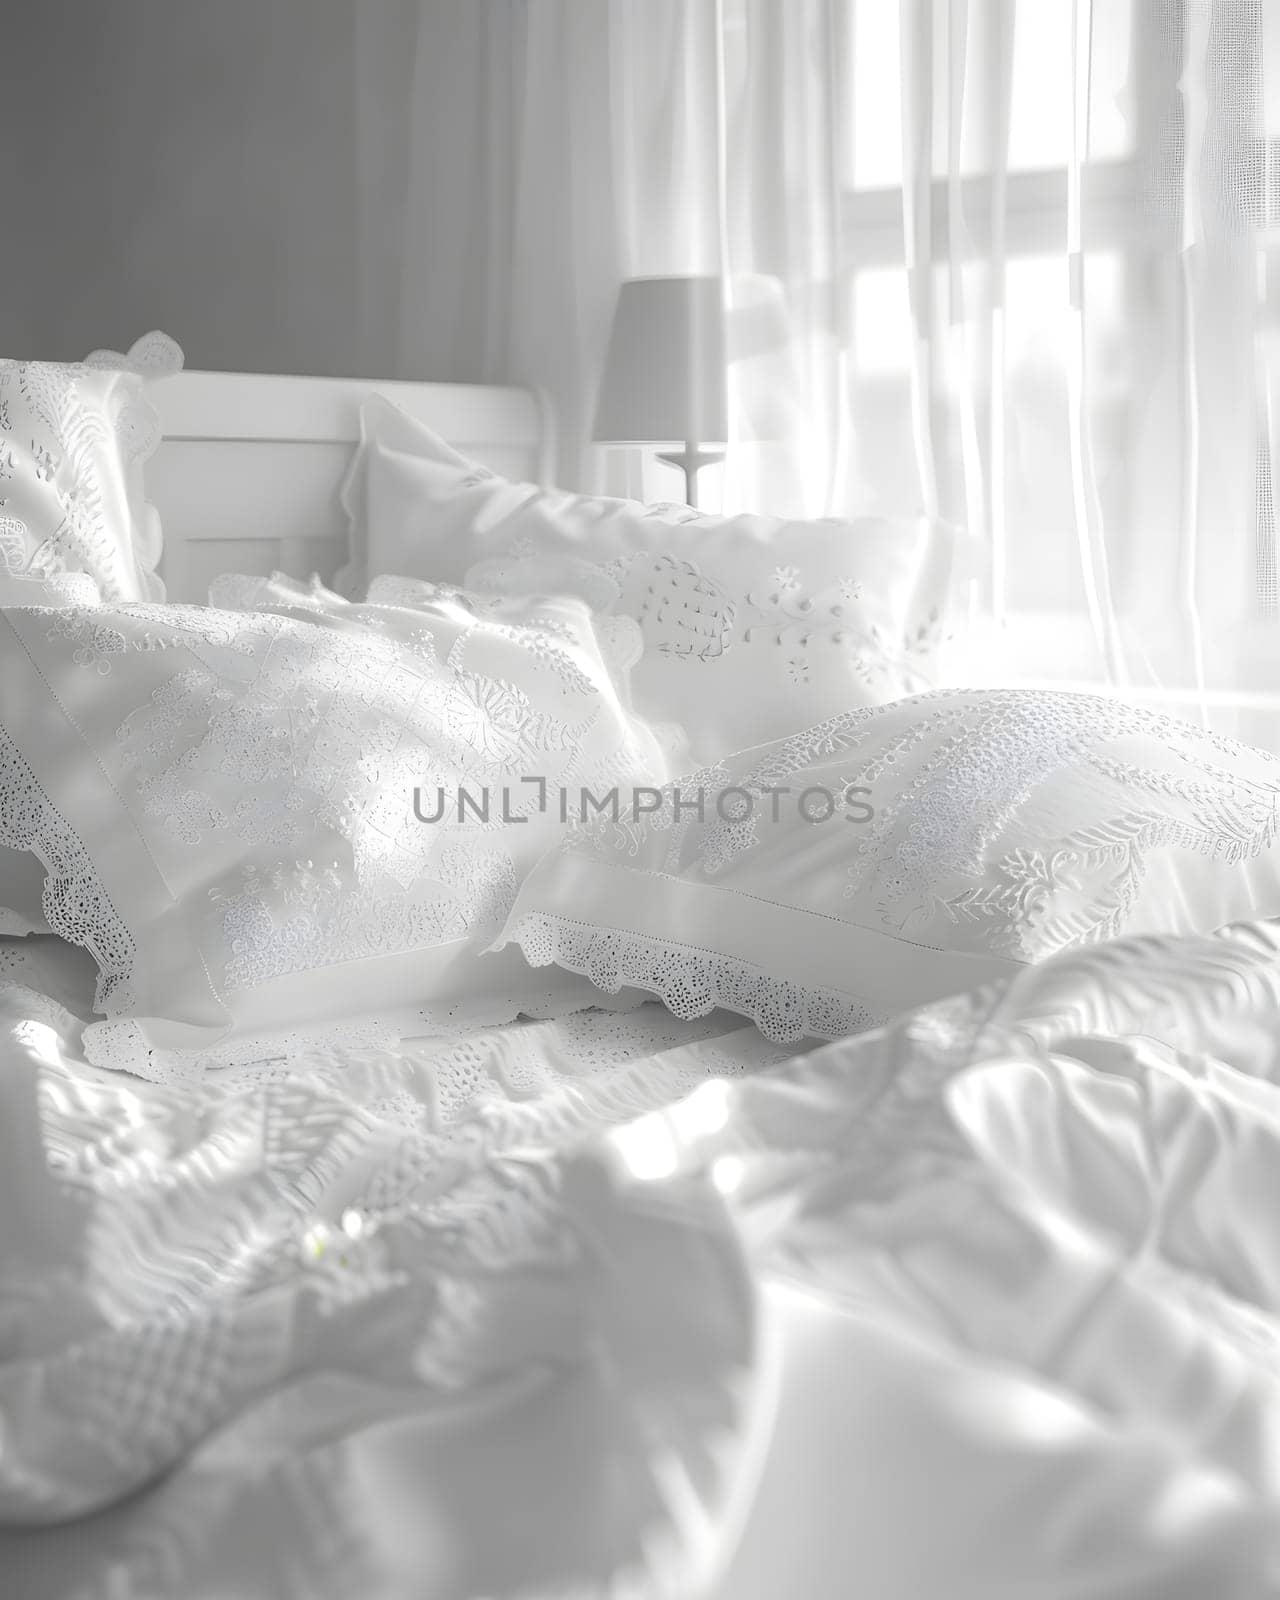 A cozy bed with white linens, pillows, and a cloudlike comforter in a grey and blackandwhite bedroom, perfect for monochrome photography enthusiasts